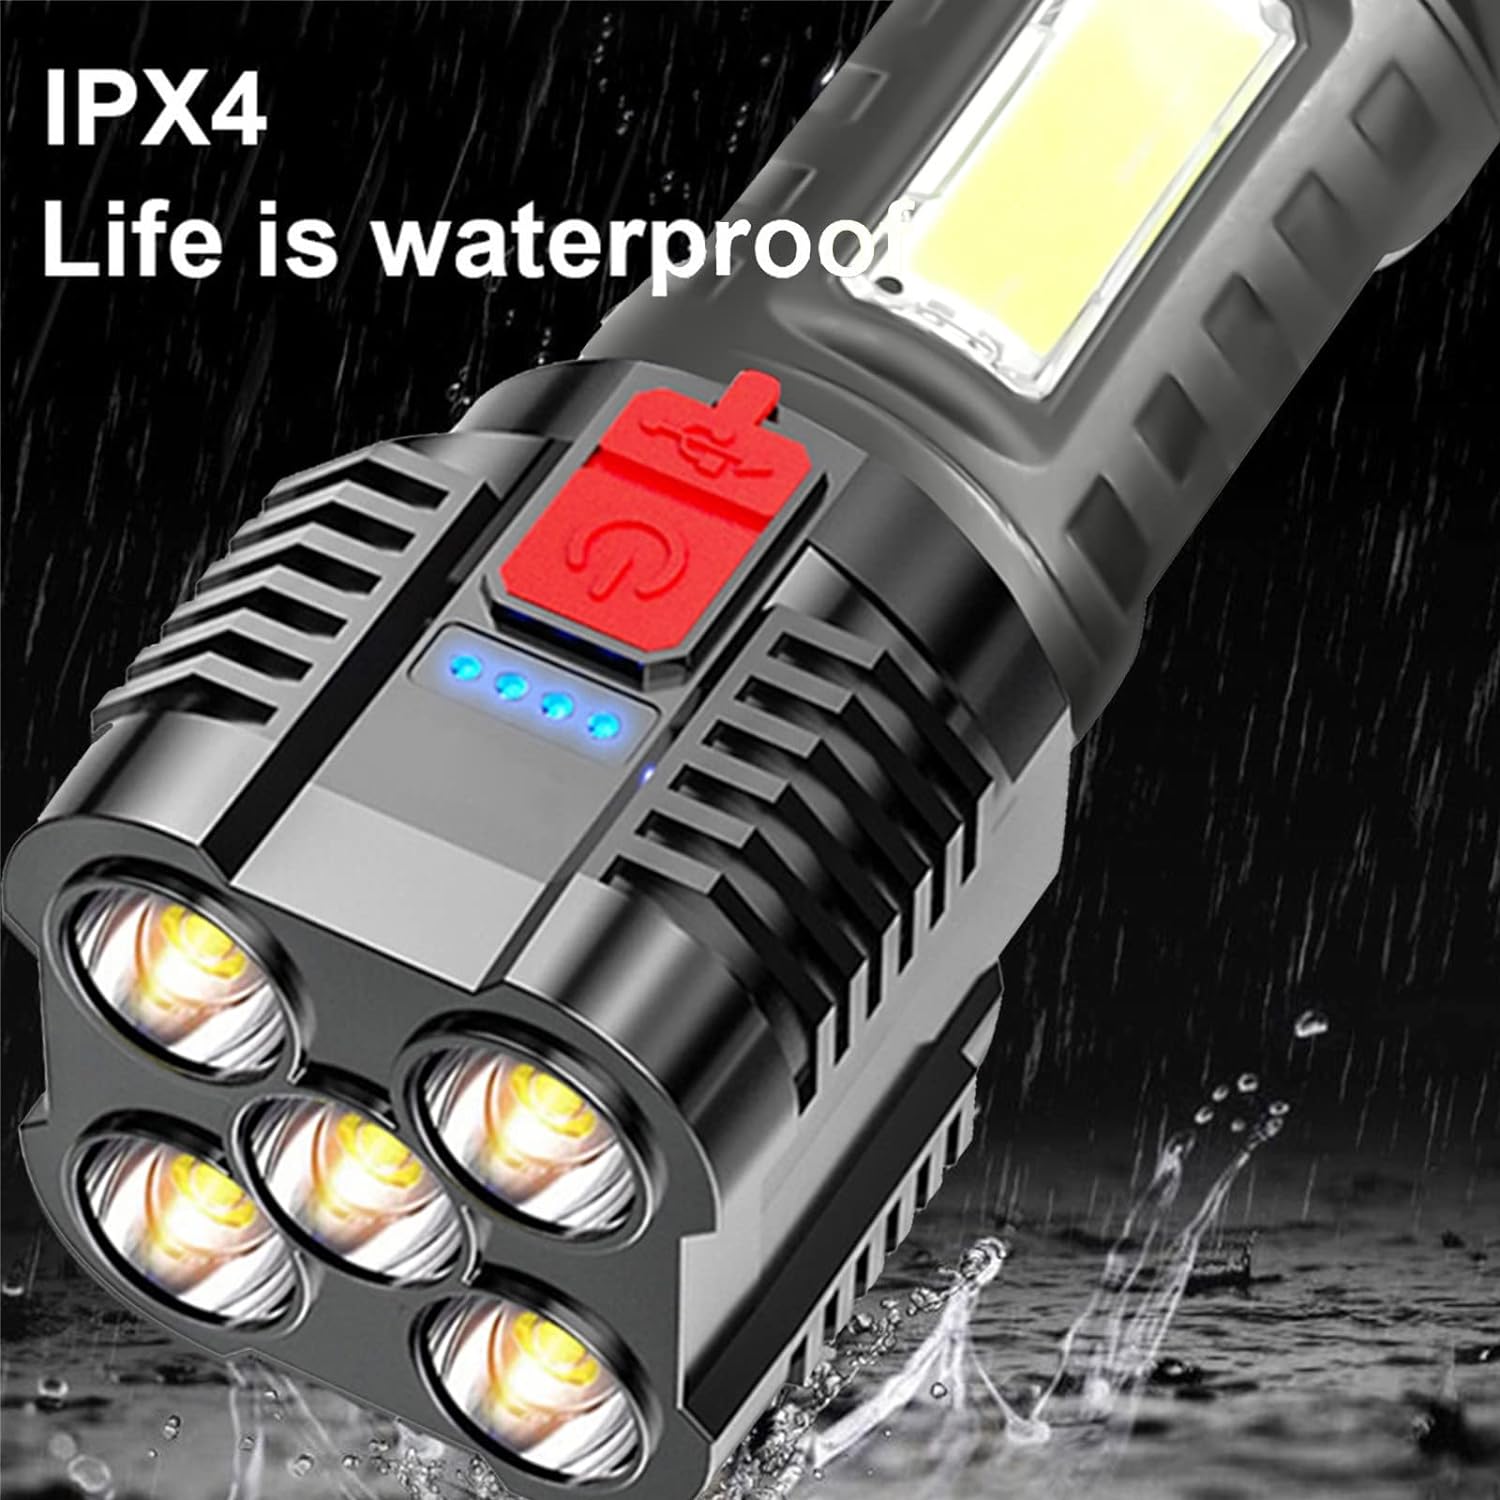 VEMMIO Five Explosion Led Flashlight,Waterproof Super Bright Rechargeable Camping,Portable Flashlights for, Flashlights High Lumens, Flashlights,Table Lamp Outdoor Lighting